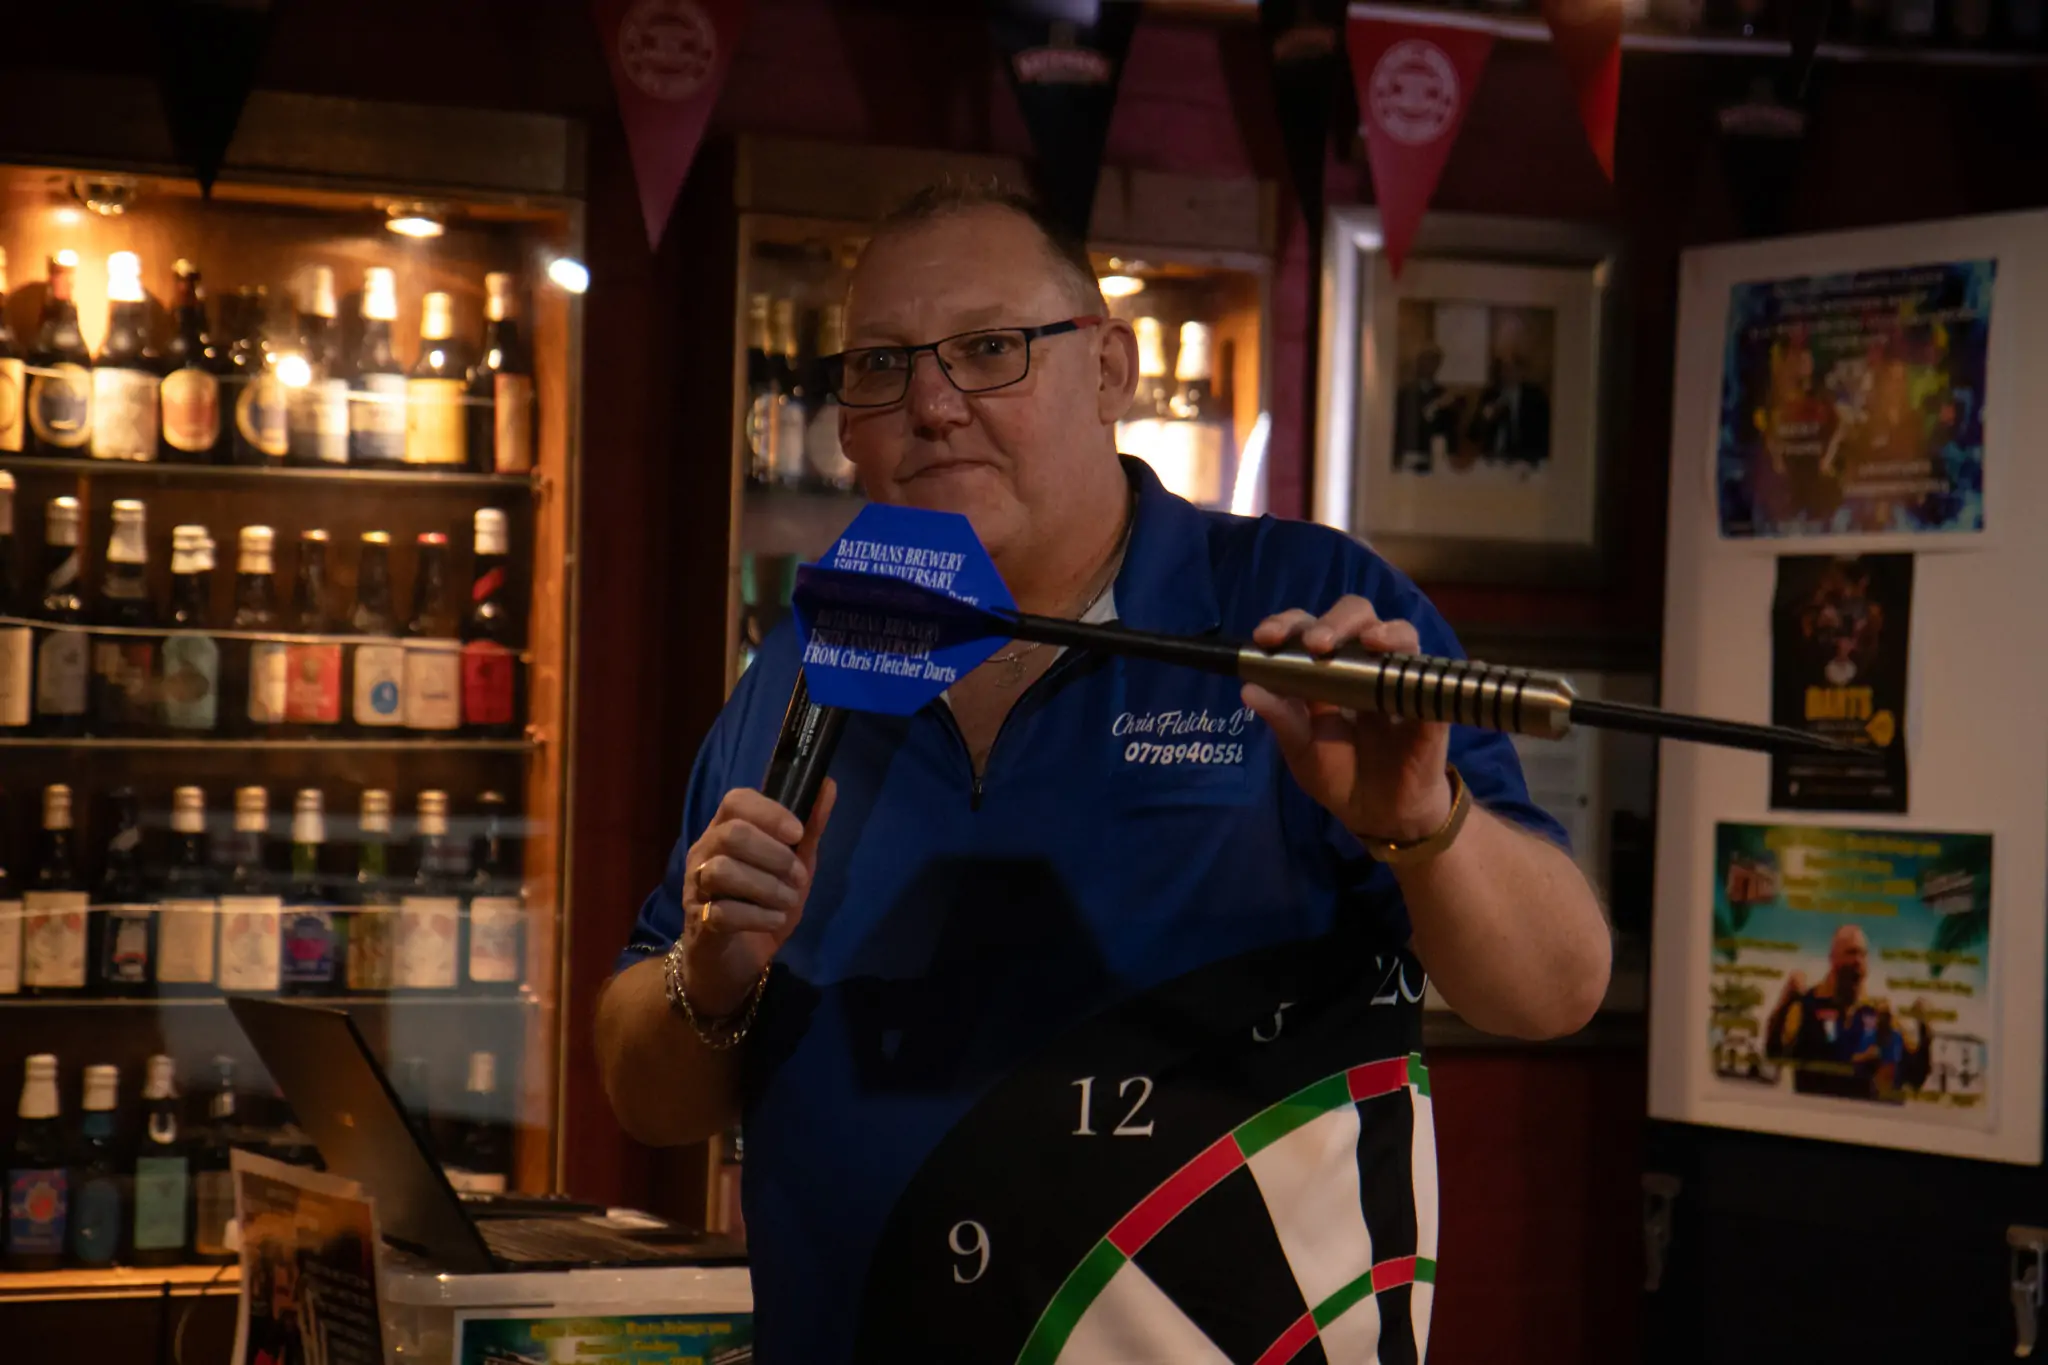 Peter Manley Pro Darts Player at the Batemans 150th anniversary celebrations darts - Chris Fletcher presenting a Large Dart memento to the Batemans Family.